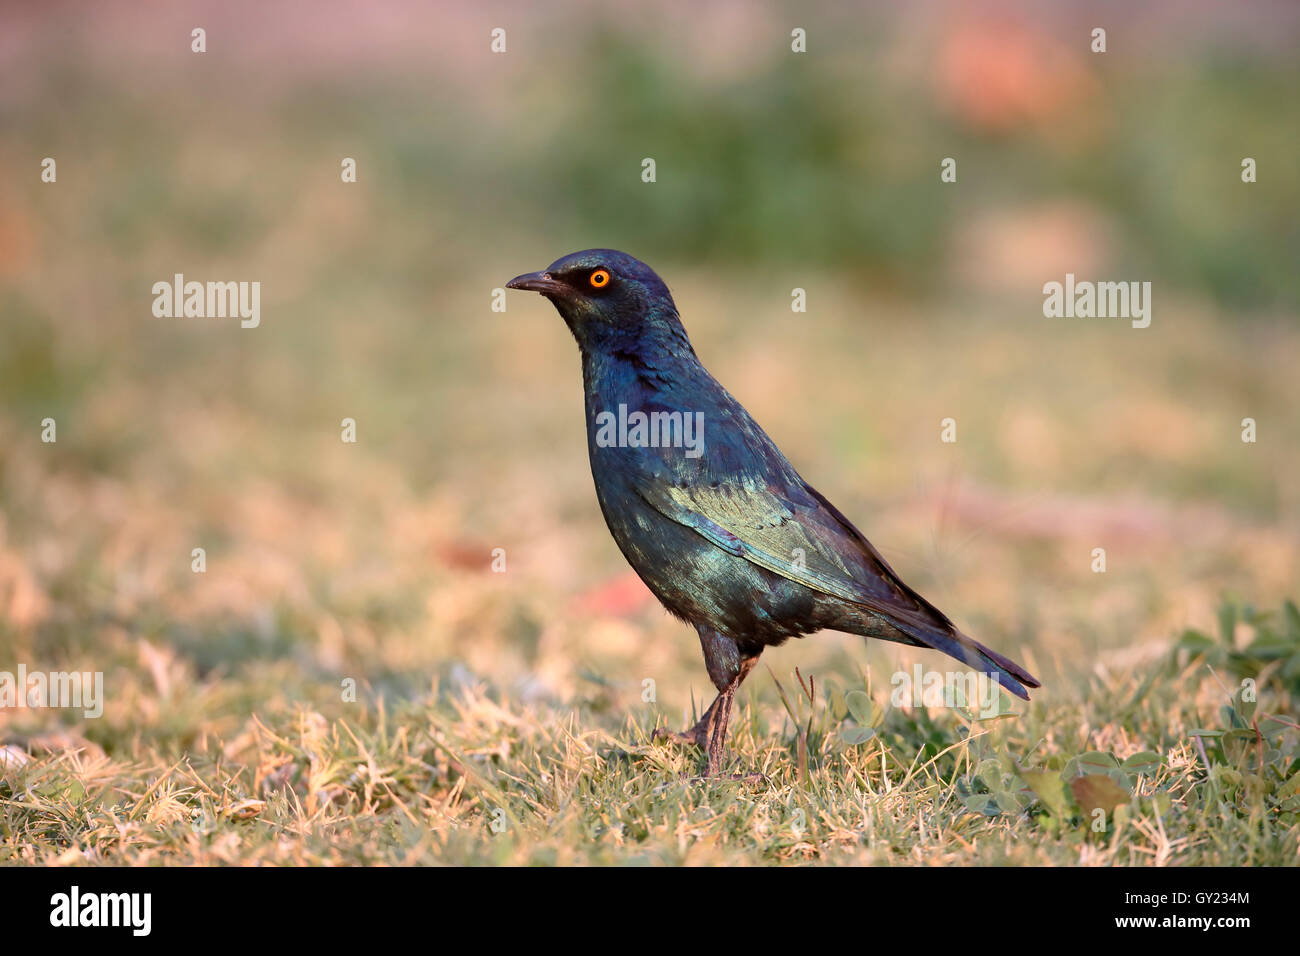 Cape-glossy starling, Lamprotornis nitens, single bird on floor, South Africa, August 2016 Stock Photo